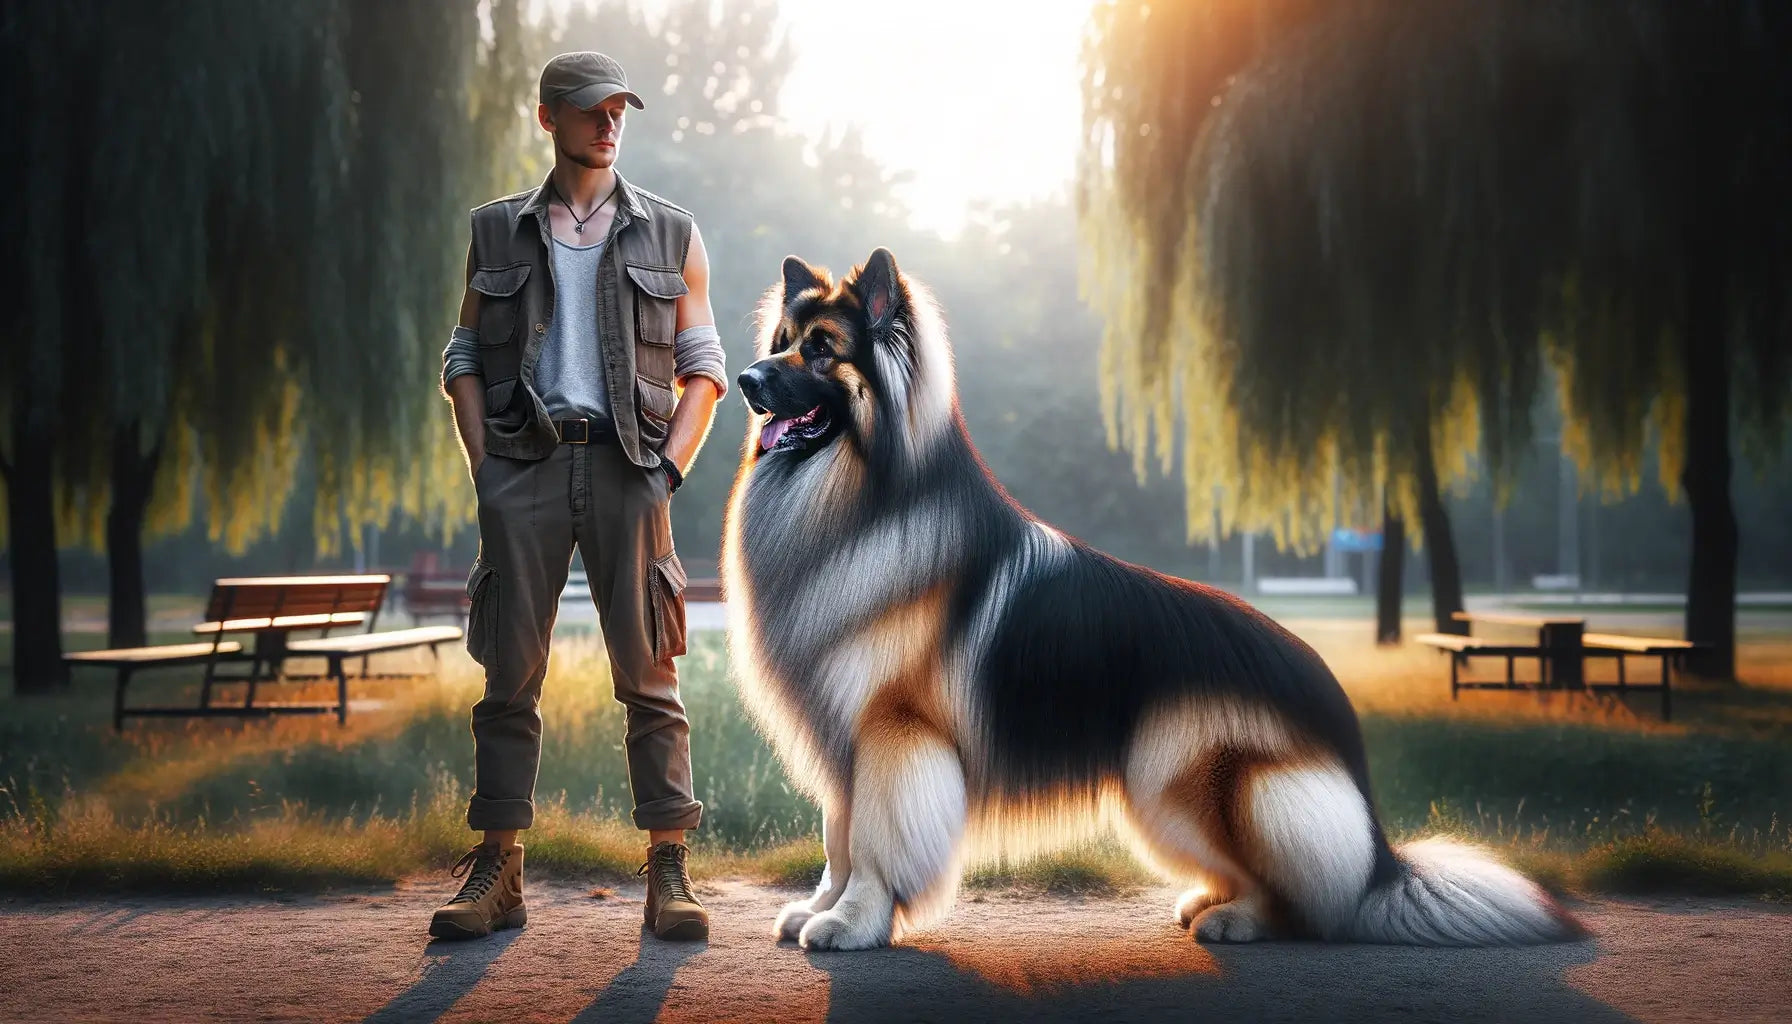 A Shiloh Shepherd standing alongside a person, showcasing the breed's large size.